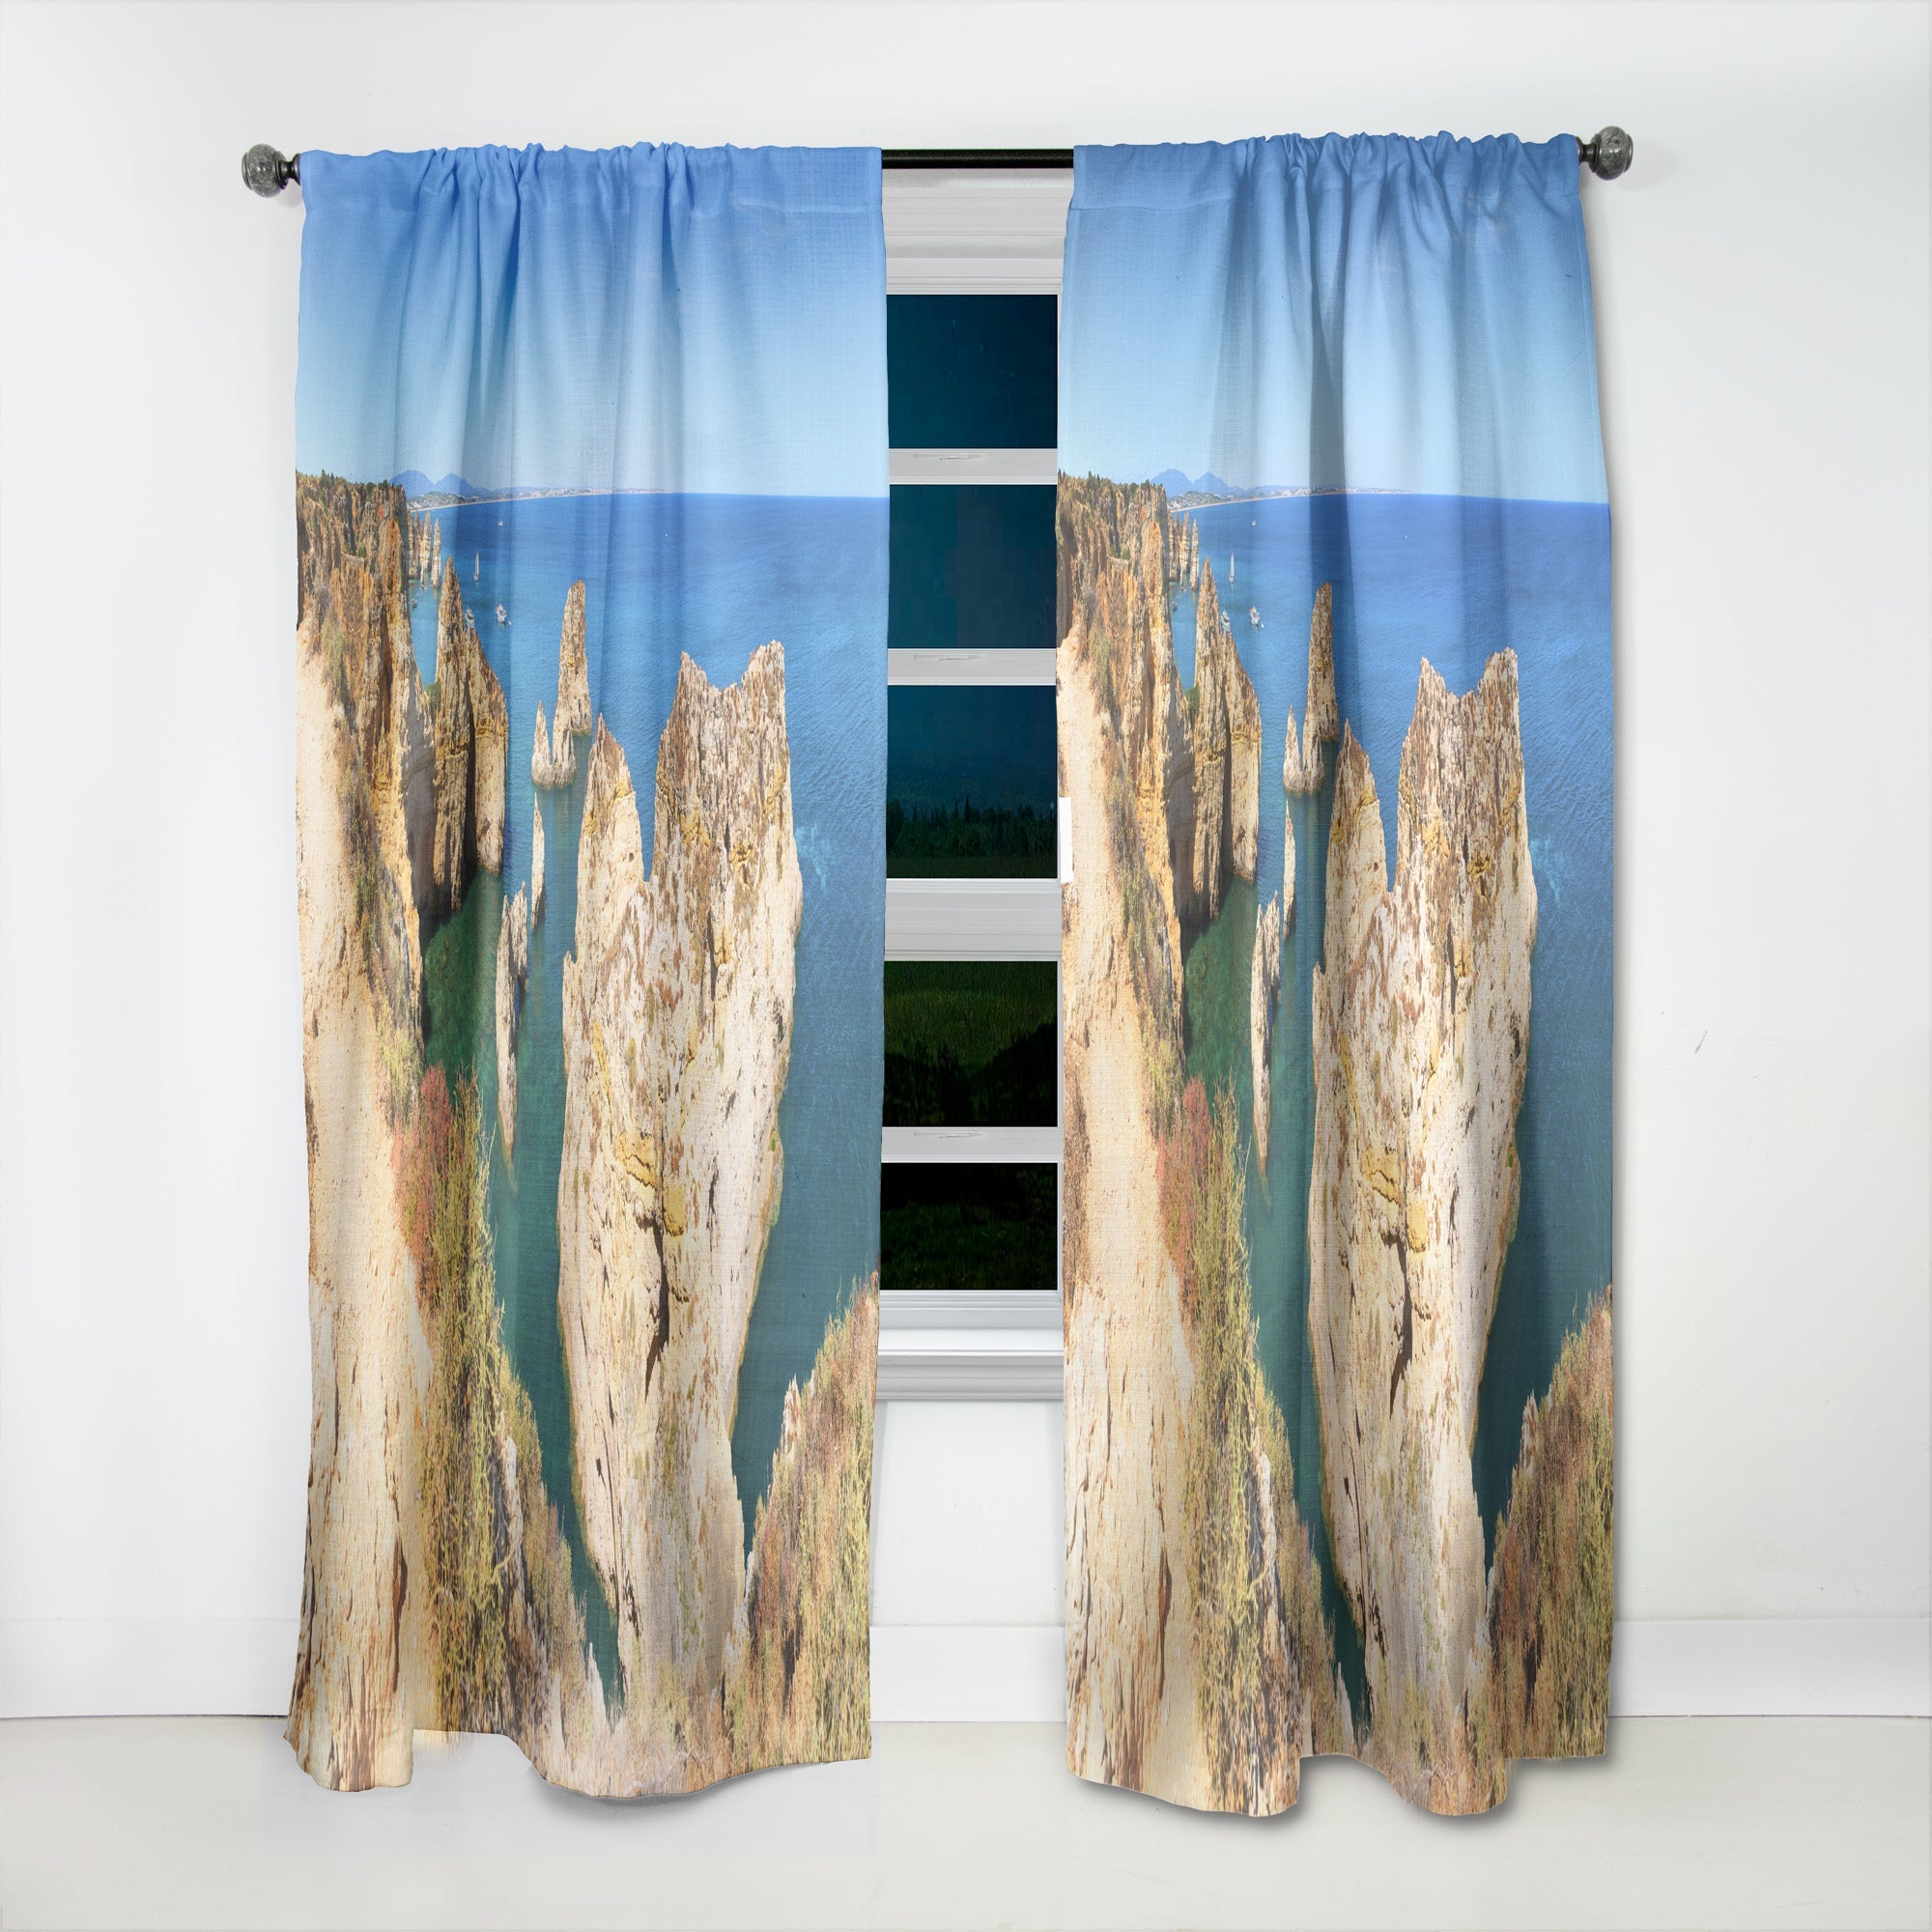 Rocky bay in Portugal' Landscapes Curtain Panel